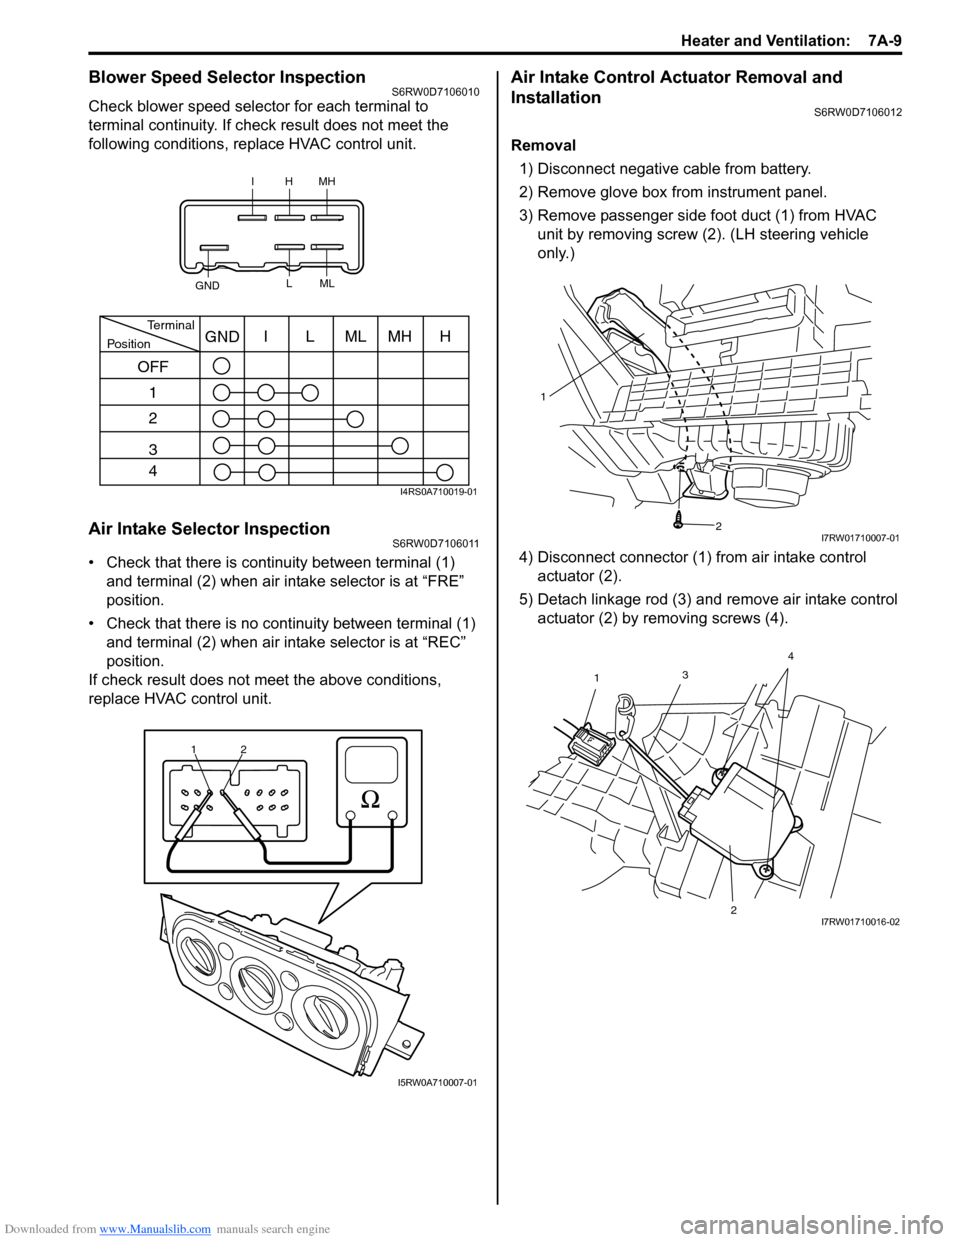 SUZUKI SX4 2006 1.G Service Workshop Manual Downloaded from www.Manualslib.com manuals search engine Heater and Ventilation:  7A-9
Blower Speed Selector InspectionS6RW0D7106010
Check blower speed selector for each terminal to 
terminal continui